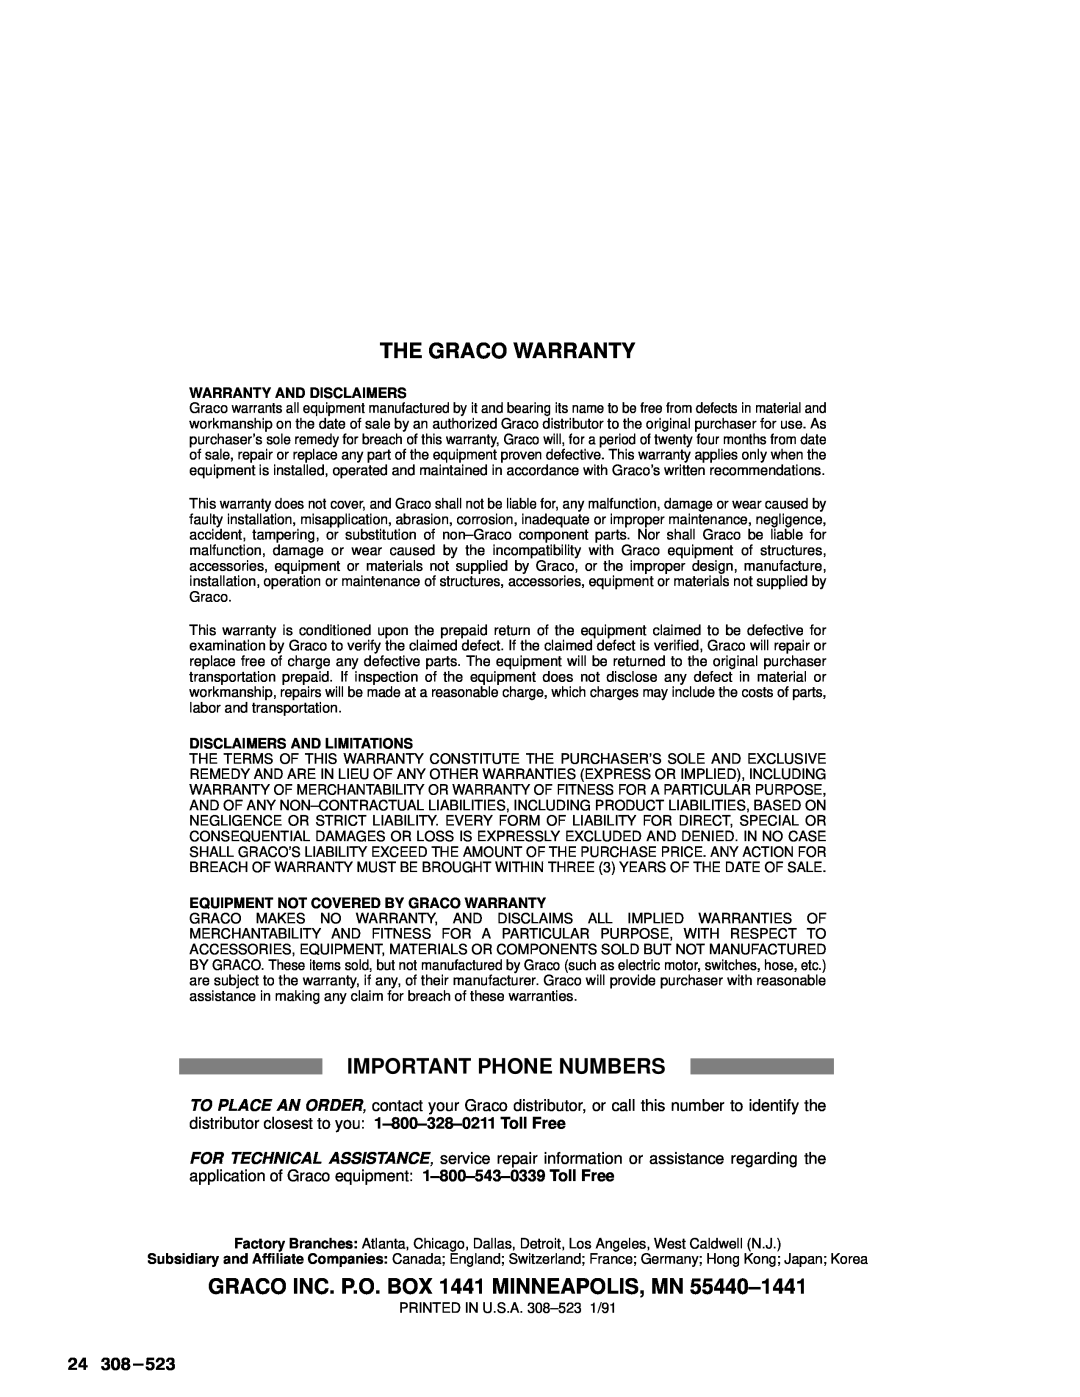 Graco Inc 800-670 manual The Graco Warranty, Important Phone Numbers, Warranty And Disclaimers, Disclaimers And Limitations 